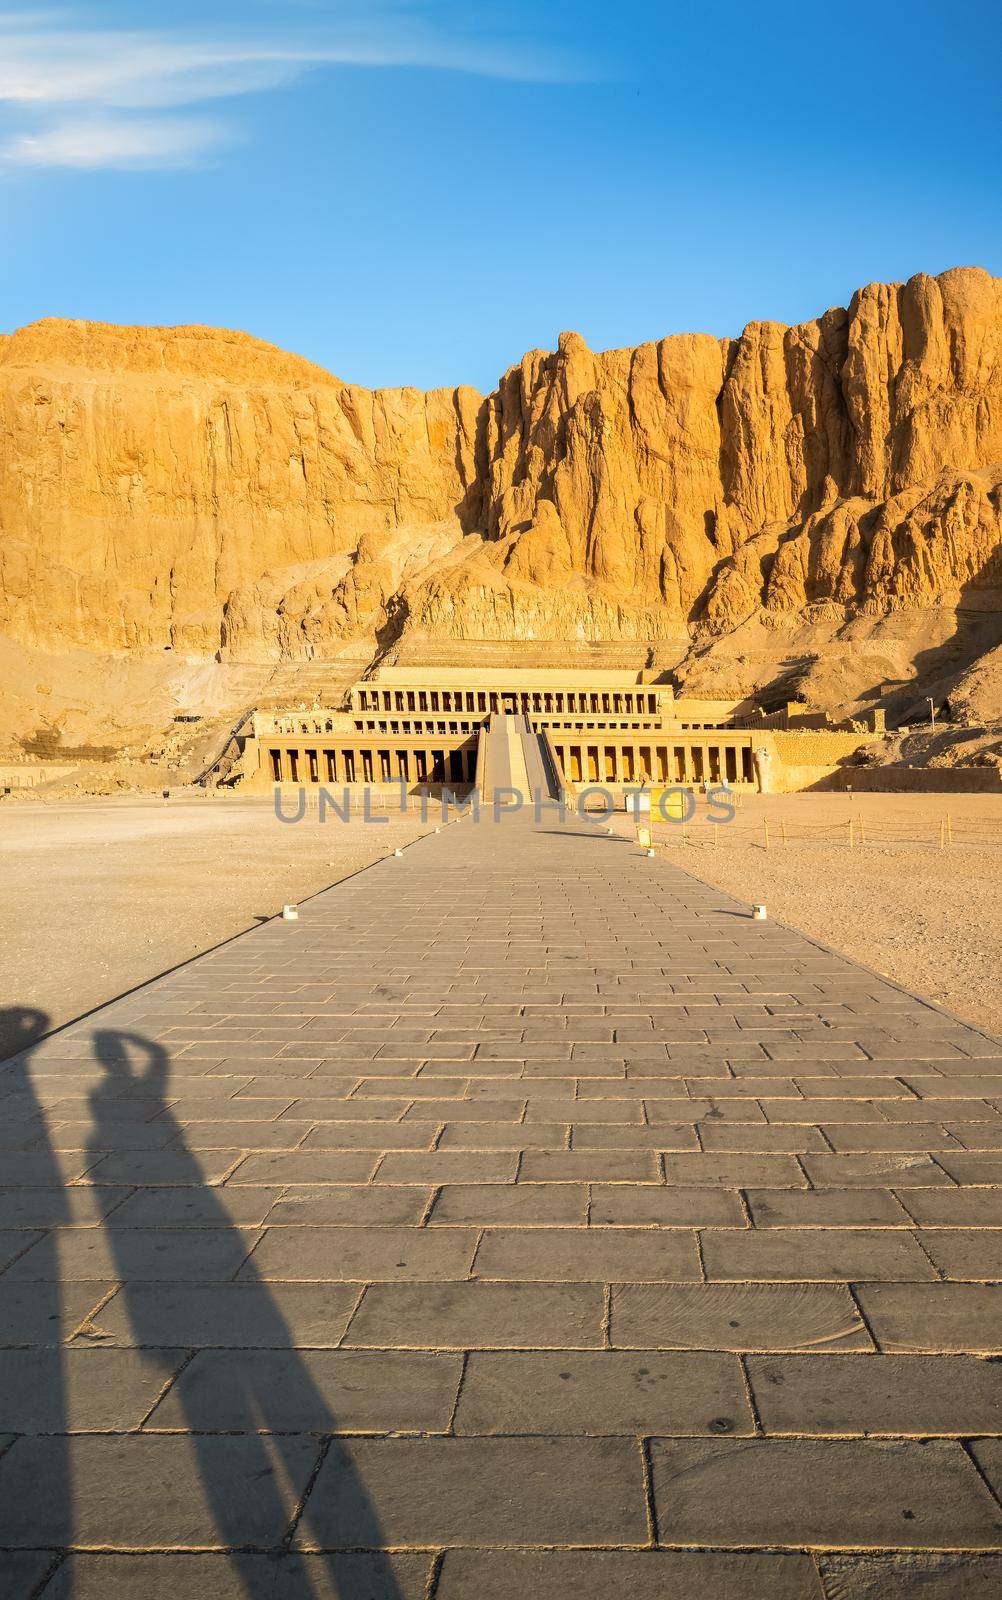 The temple of Hatshepsut by Givaga